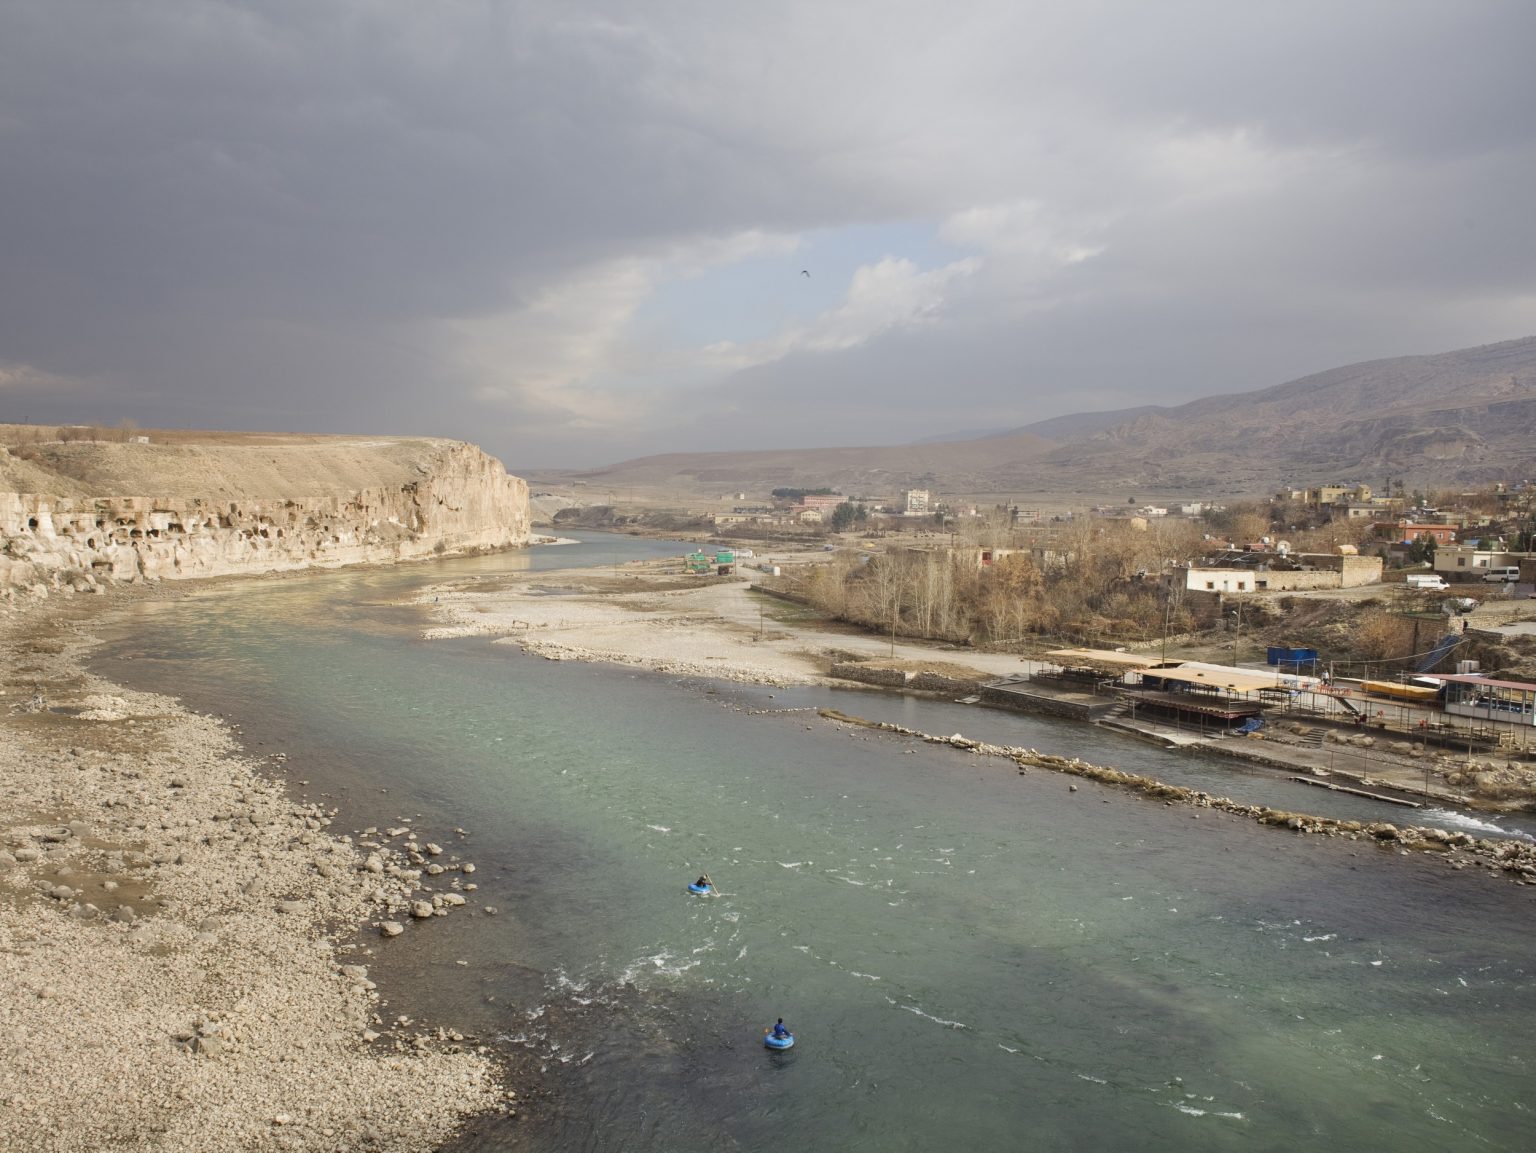 View of the Tigris river from the new bridge in Hasankeyf.